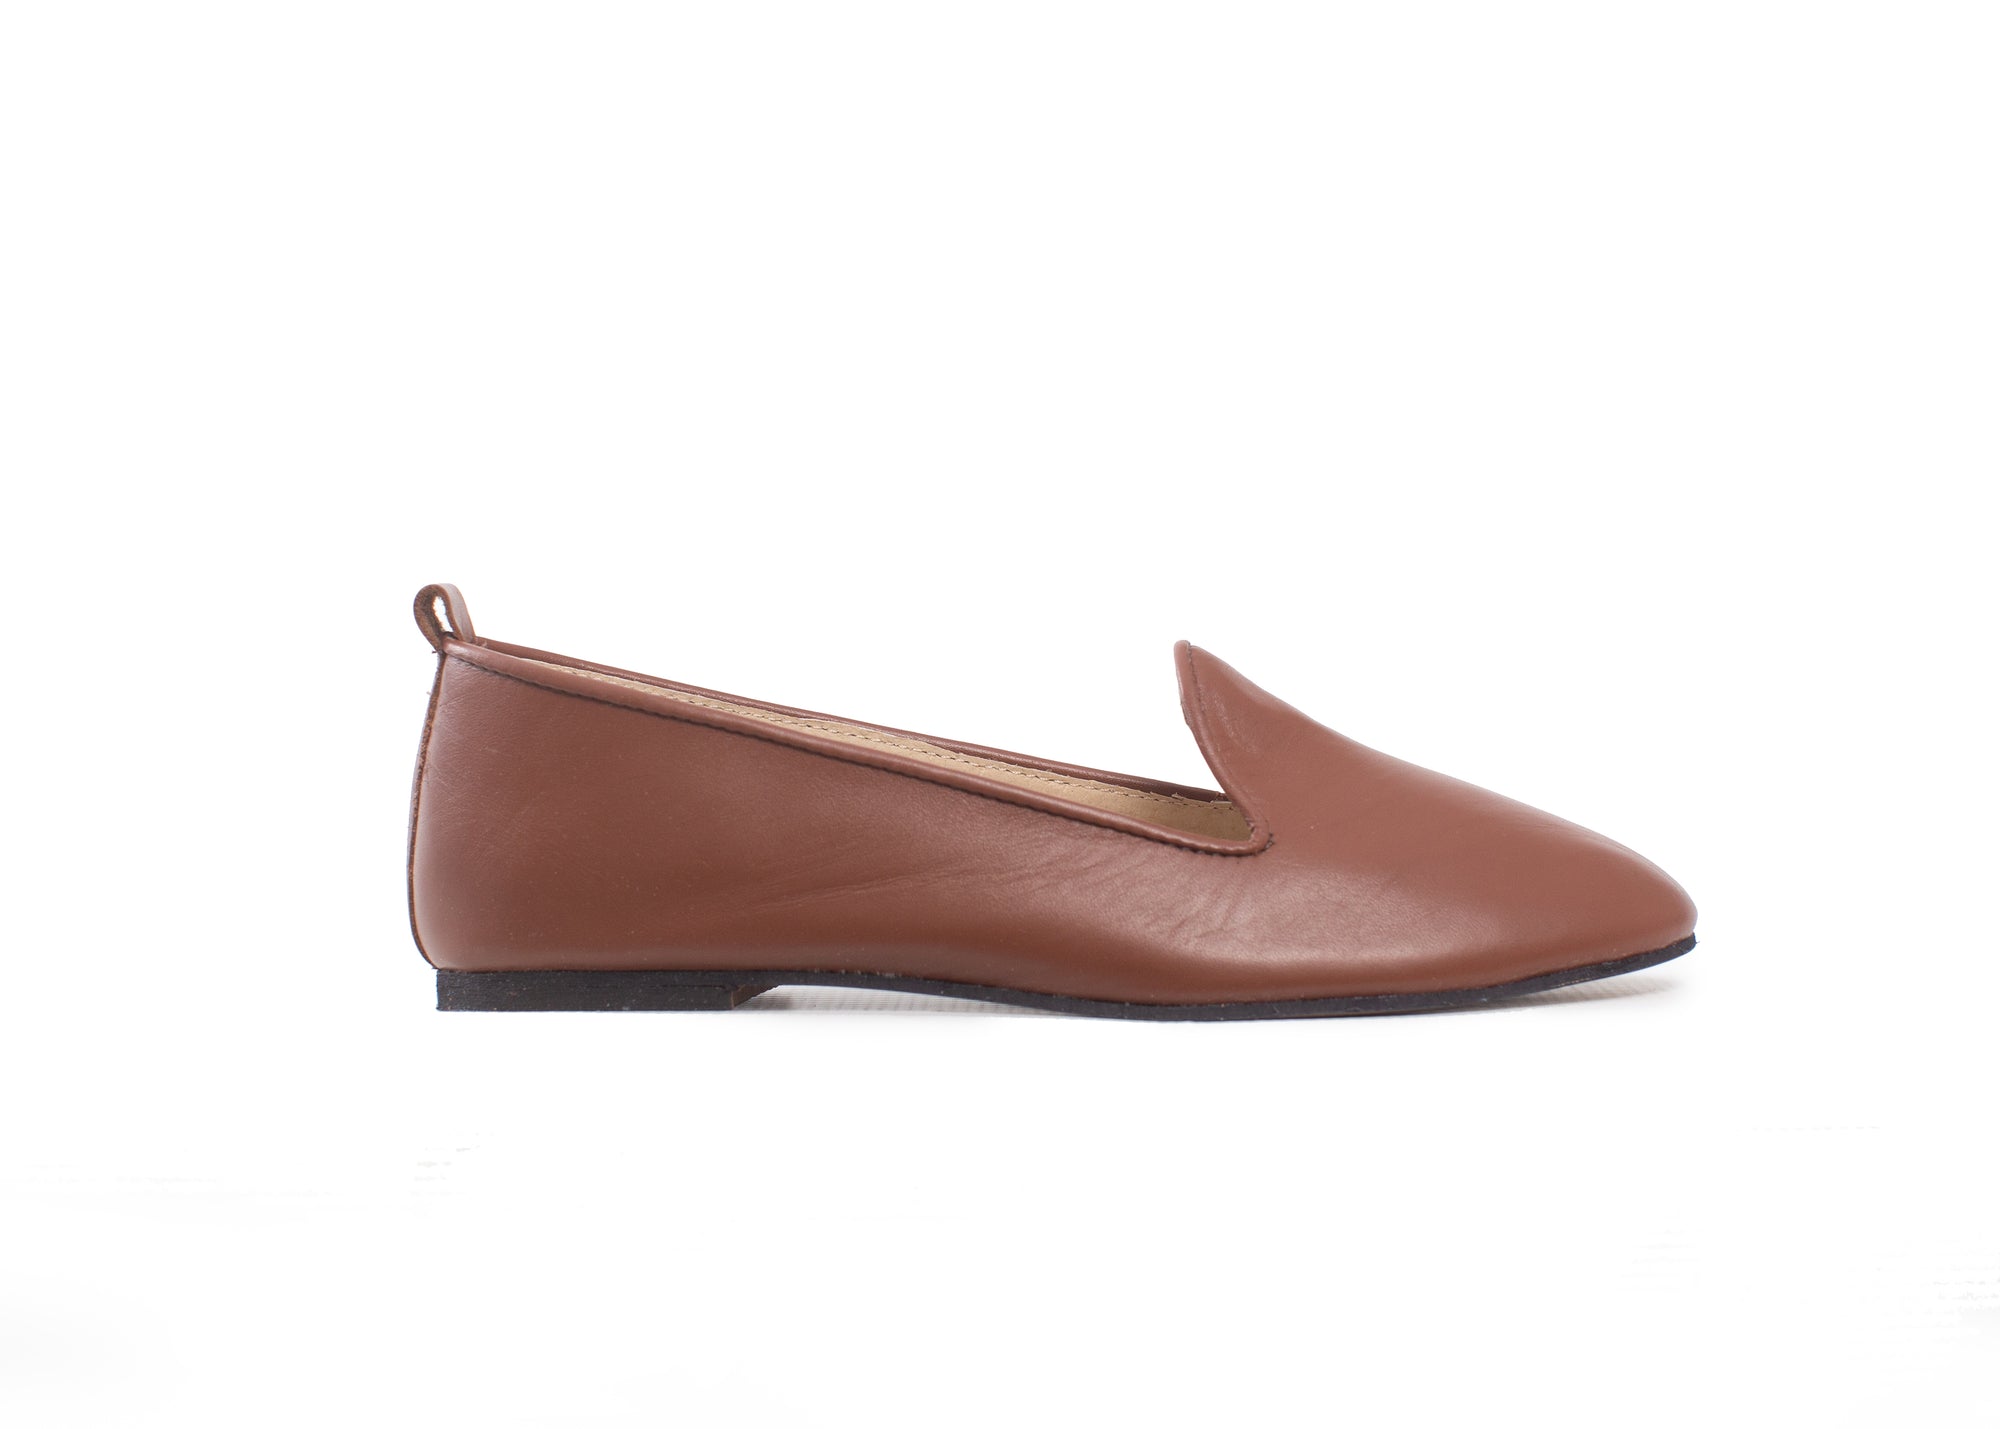 Round loafer - bister leather